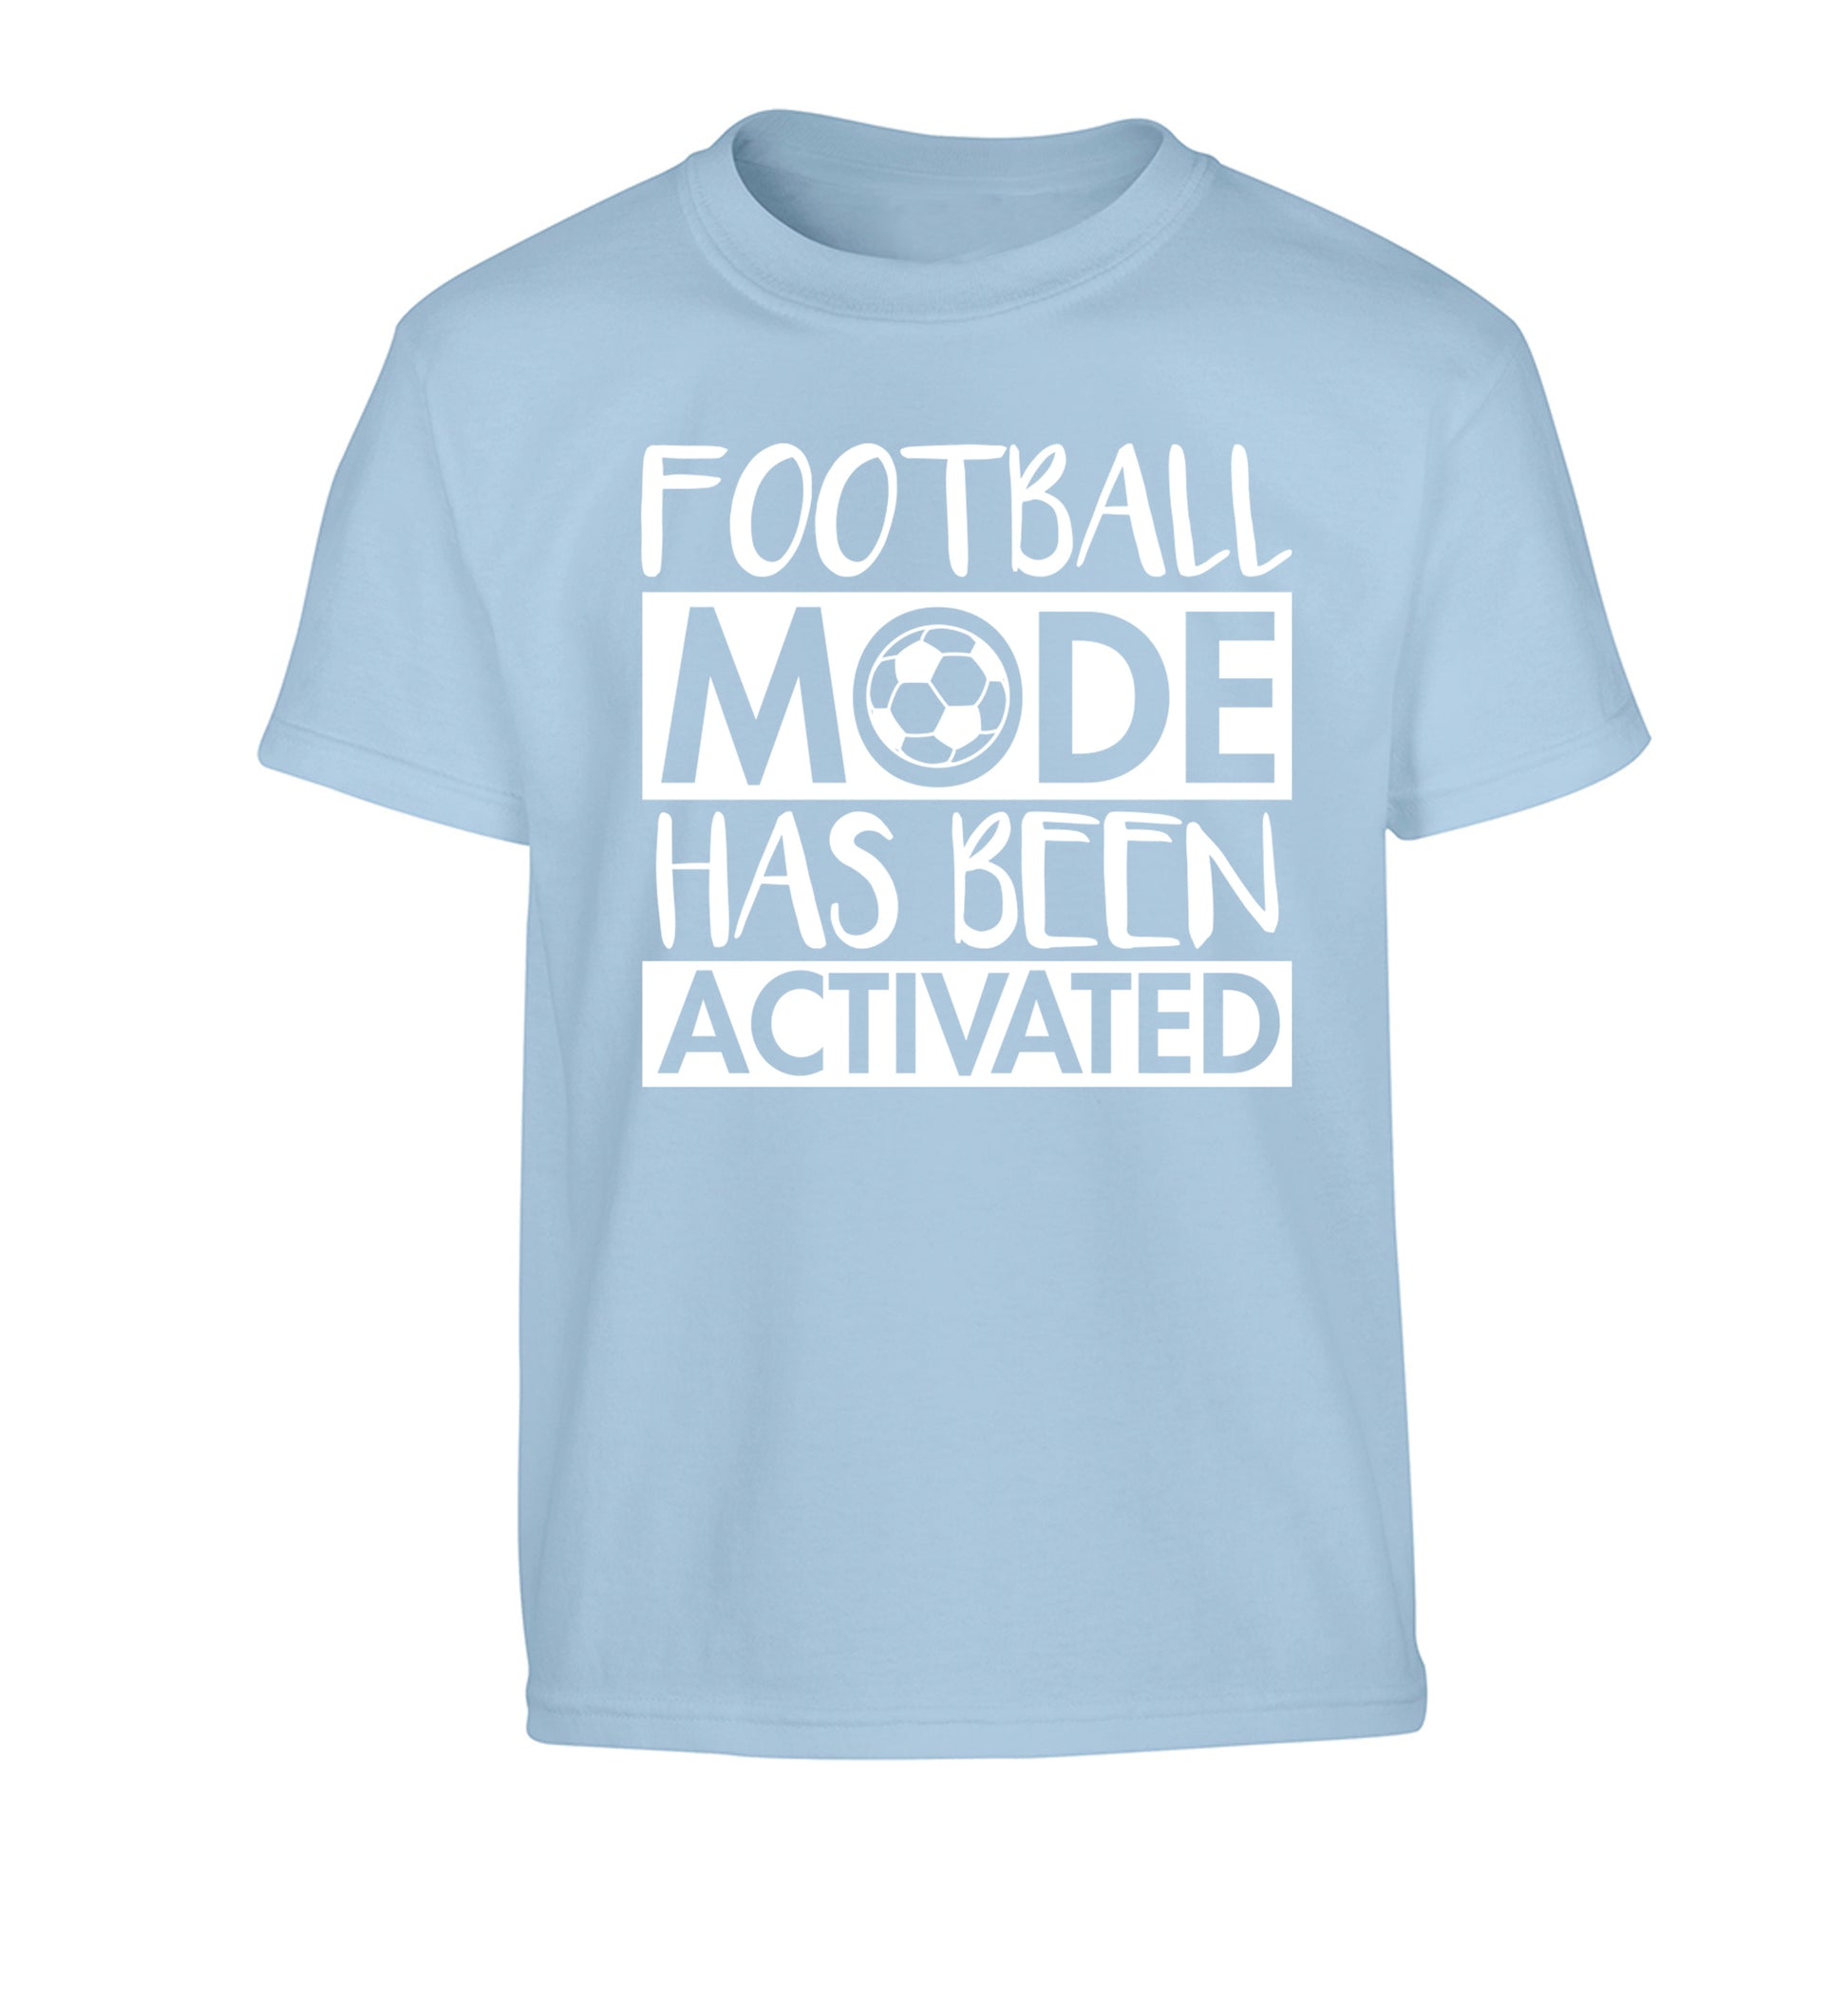 Football mode has been activated Children's light blue Tshirt 12-14 Years